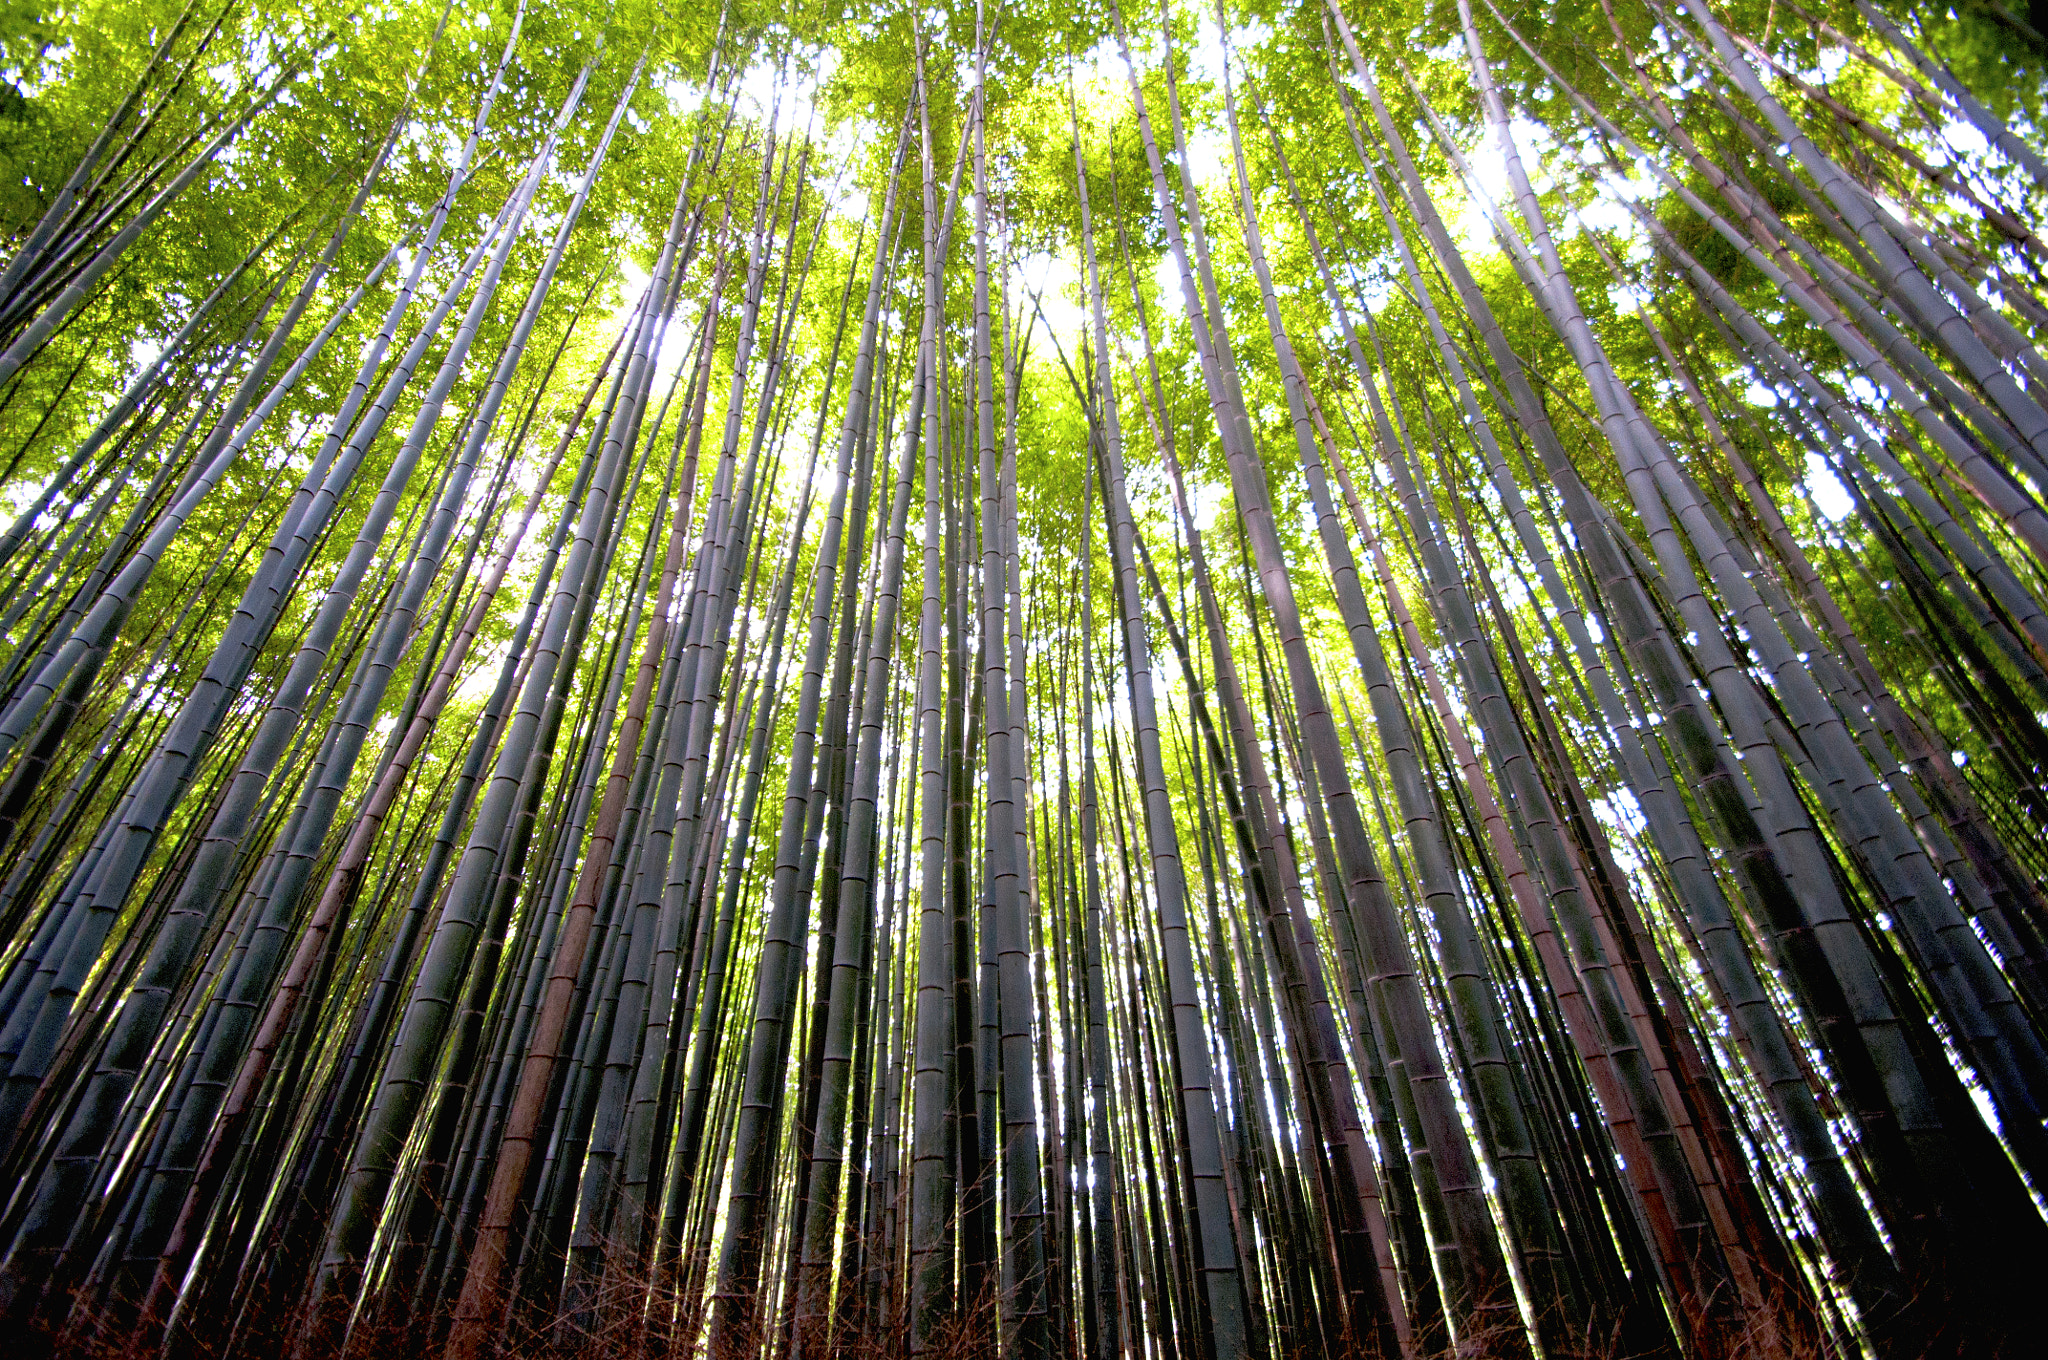 Nikon D90 + Tamron SP AF 10-24mm F3.5-4.5 Di II LD Aspherical (IF) sample photo. Bamboo forest photography